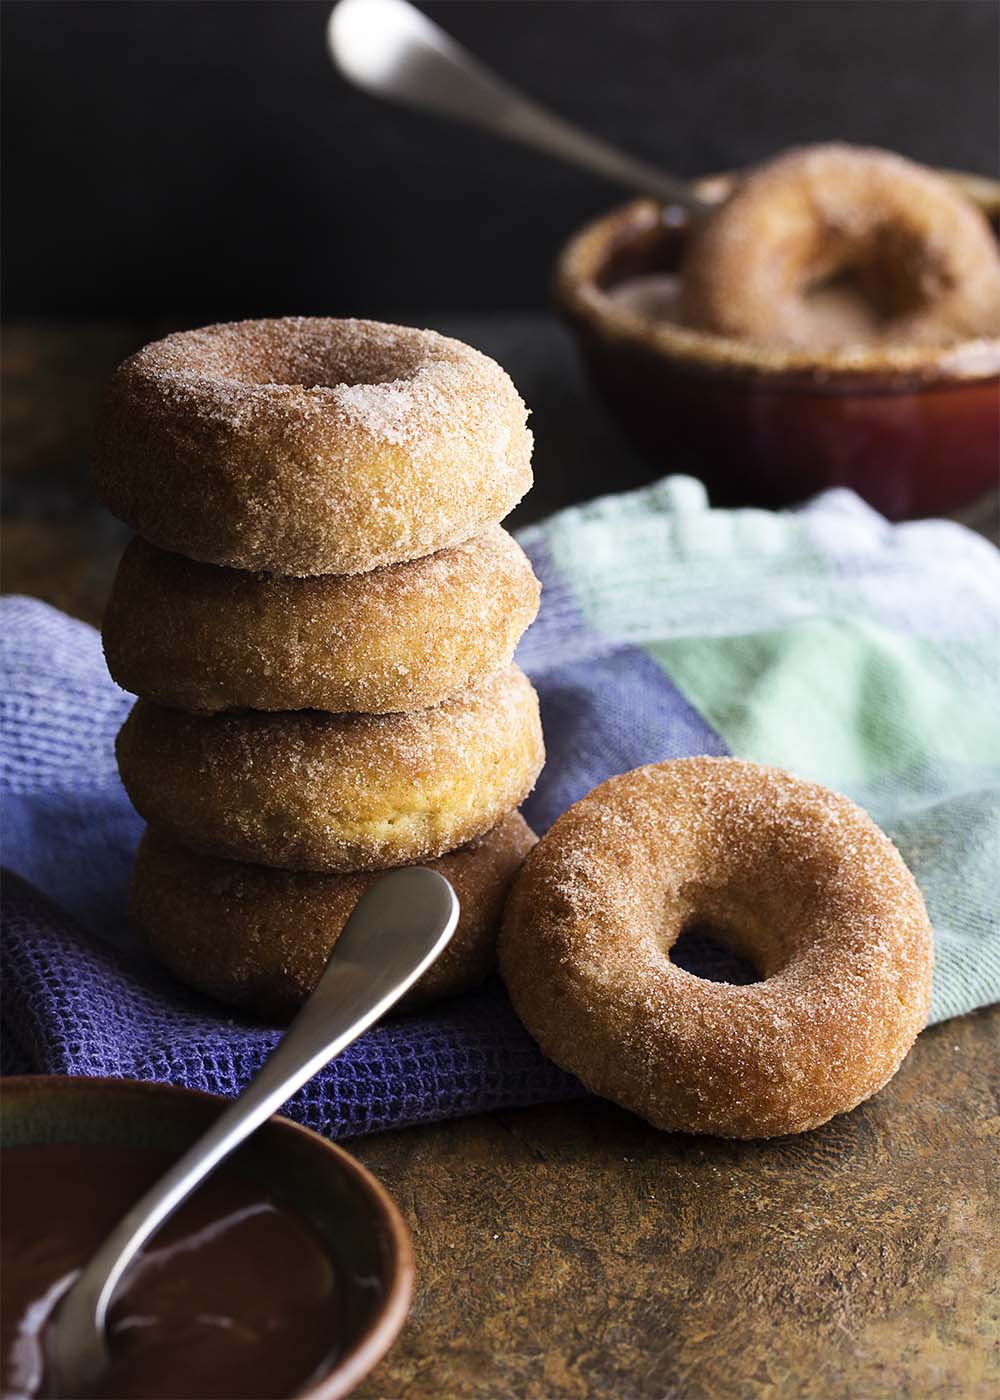 Churros just got a little bit healthier! No deep frying needed. Baked churro donuts are make in a donut pan and rolled in cinnamon sugar. This means you can totally justify the spicy chocolate sauce to dip them in. | justalittlebitofbacon.com